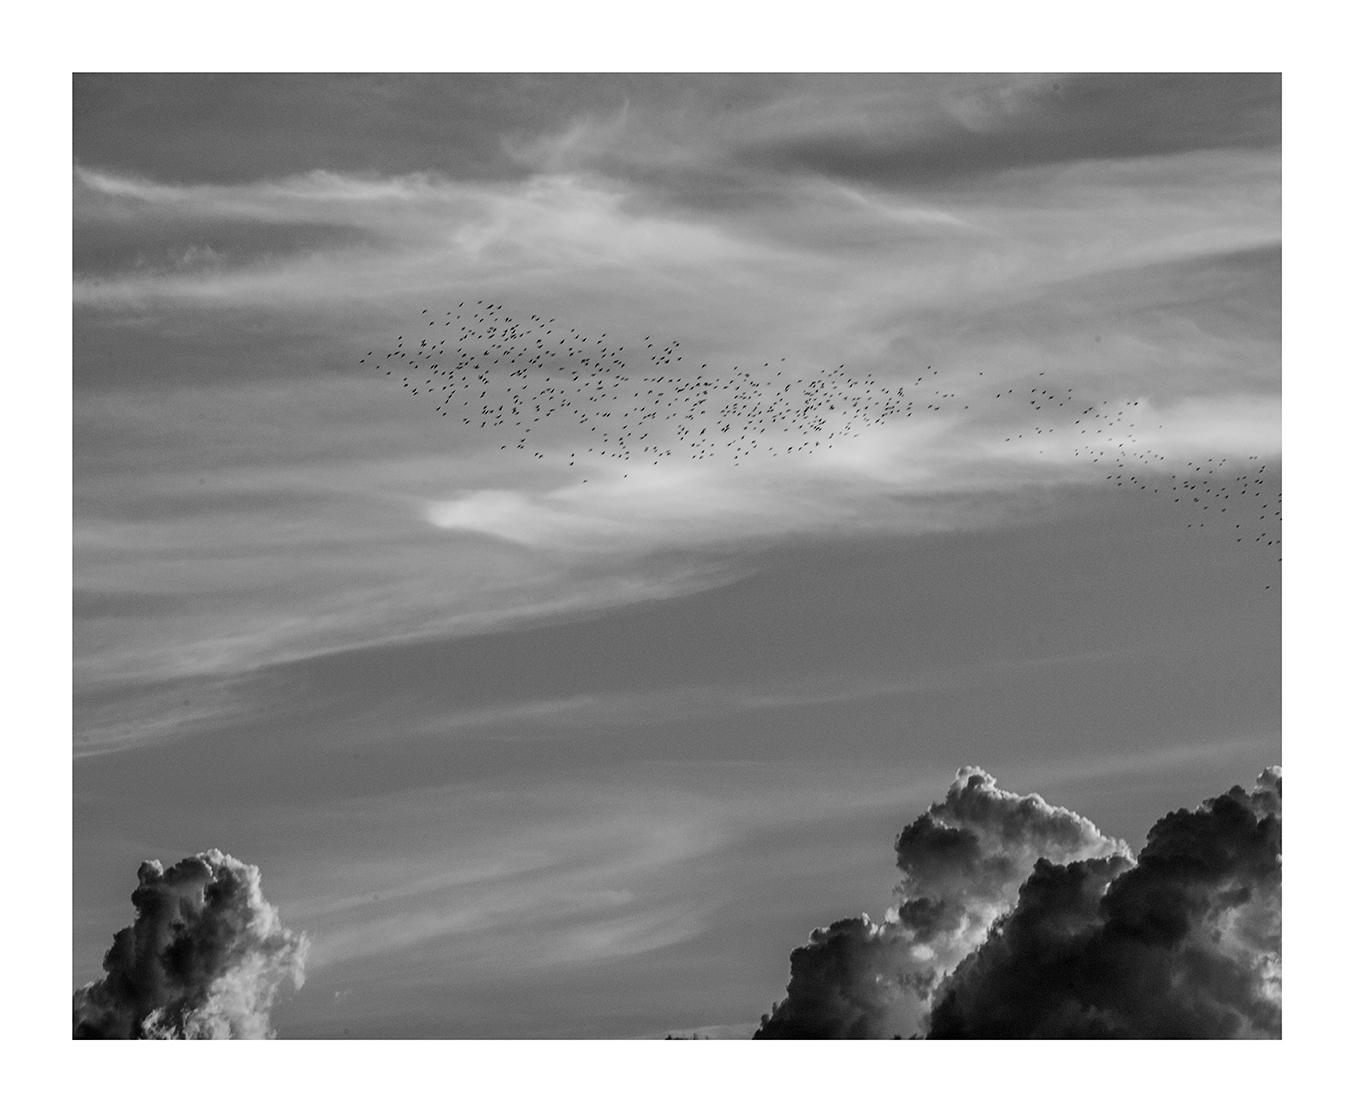 A flock of Starlings in the early evening sky, Salisbury, Maryland